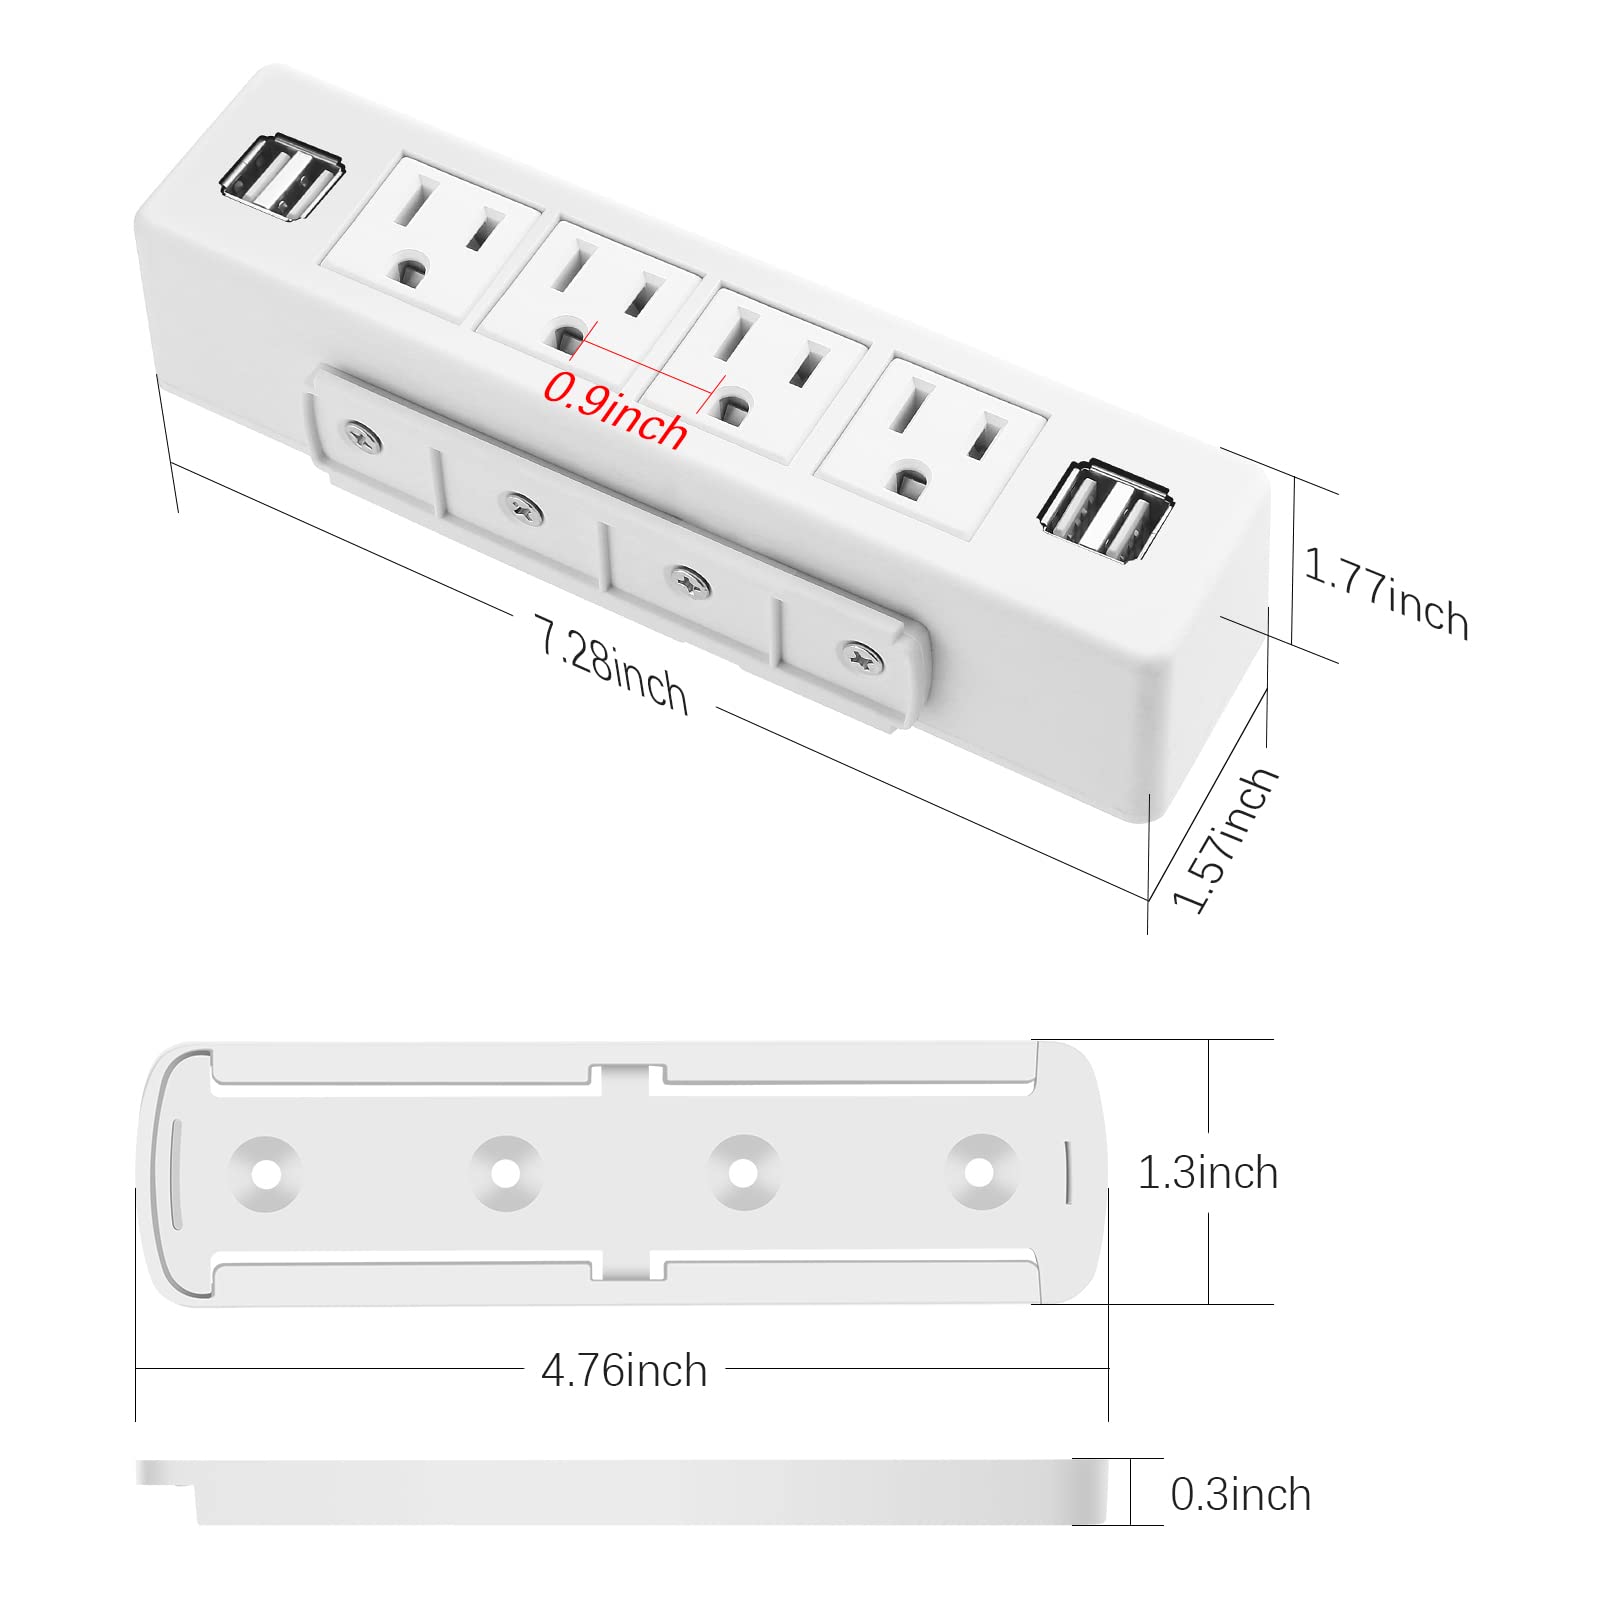 vilong White Under Desk Power Strip, Adhesive Wall Mount Power Strip with USB,Desktop Power Outlets, Removable Mount Multi-Outlets with